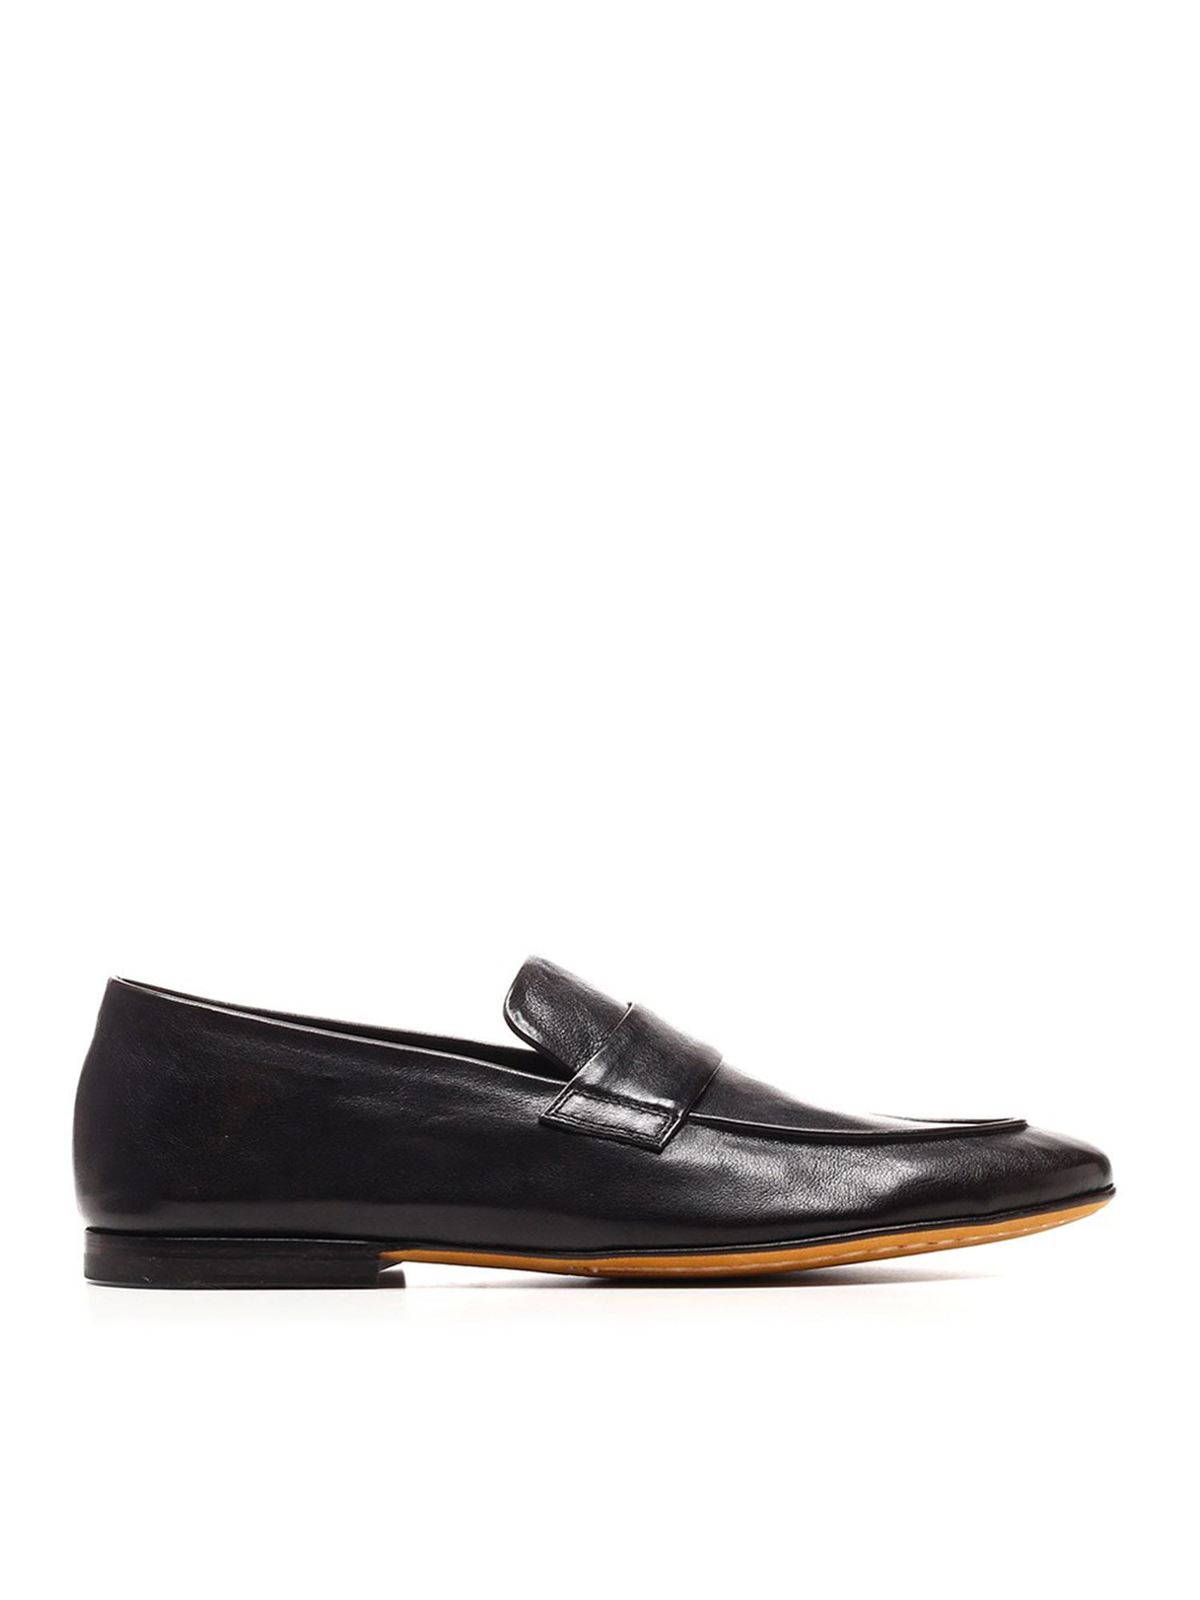 OFFICINE CREATIVE AIRTO 01 LOAFERS IN BLACK